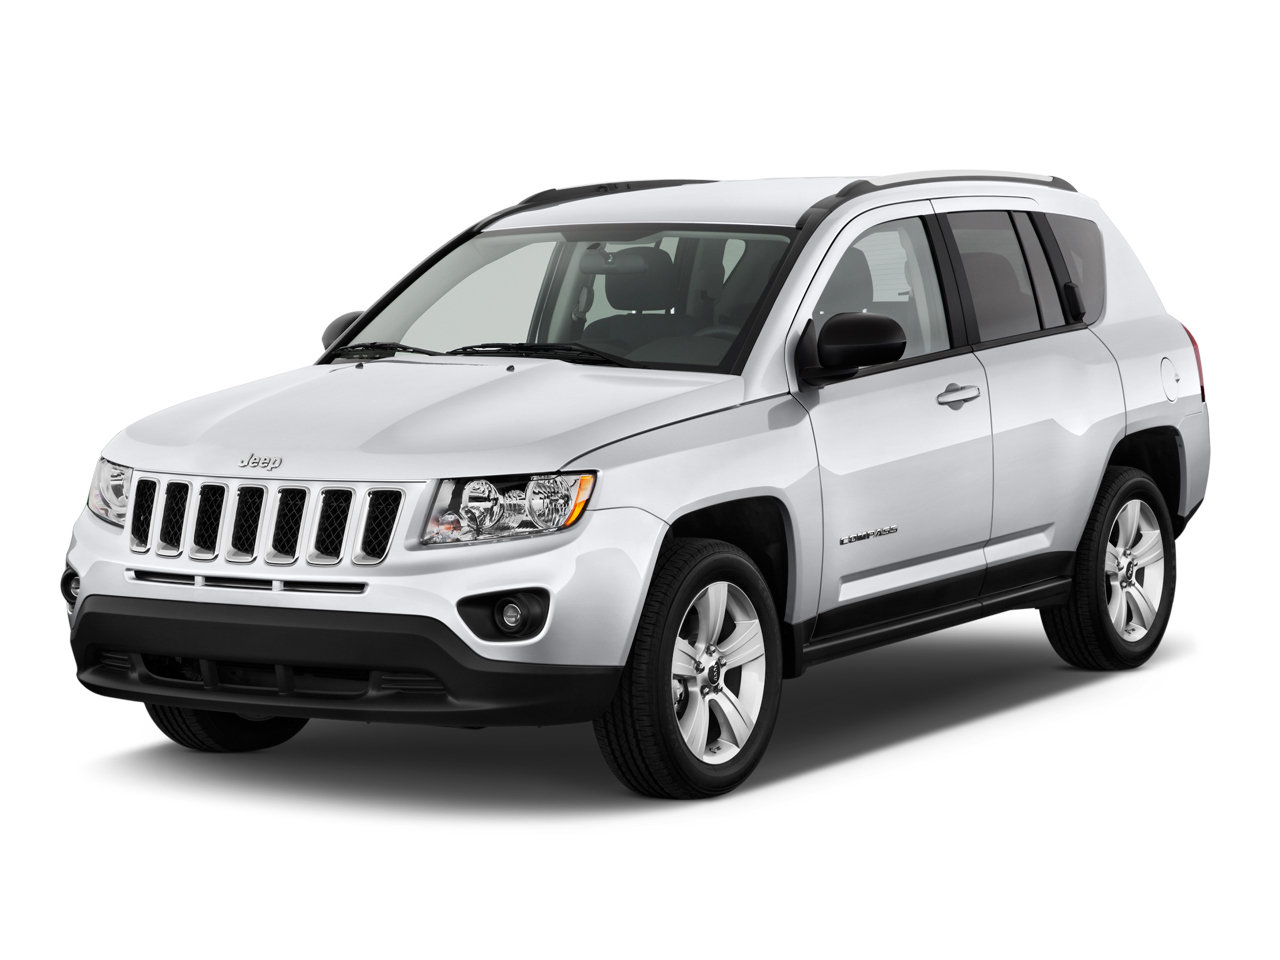 2012 Jeep Compass oem parts and accessories on sale